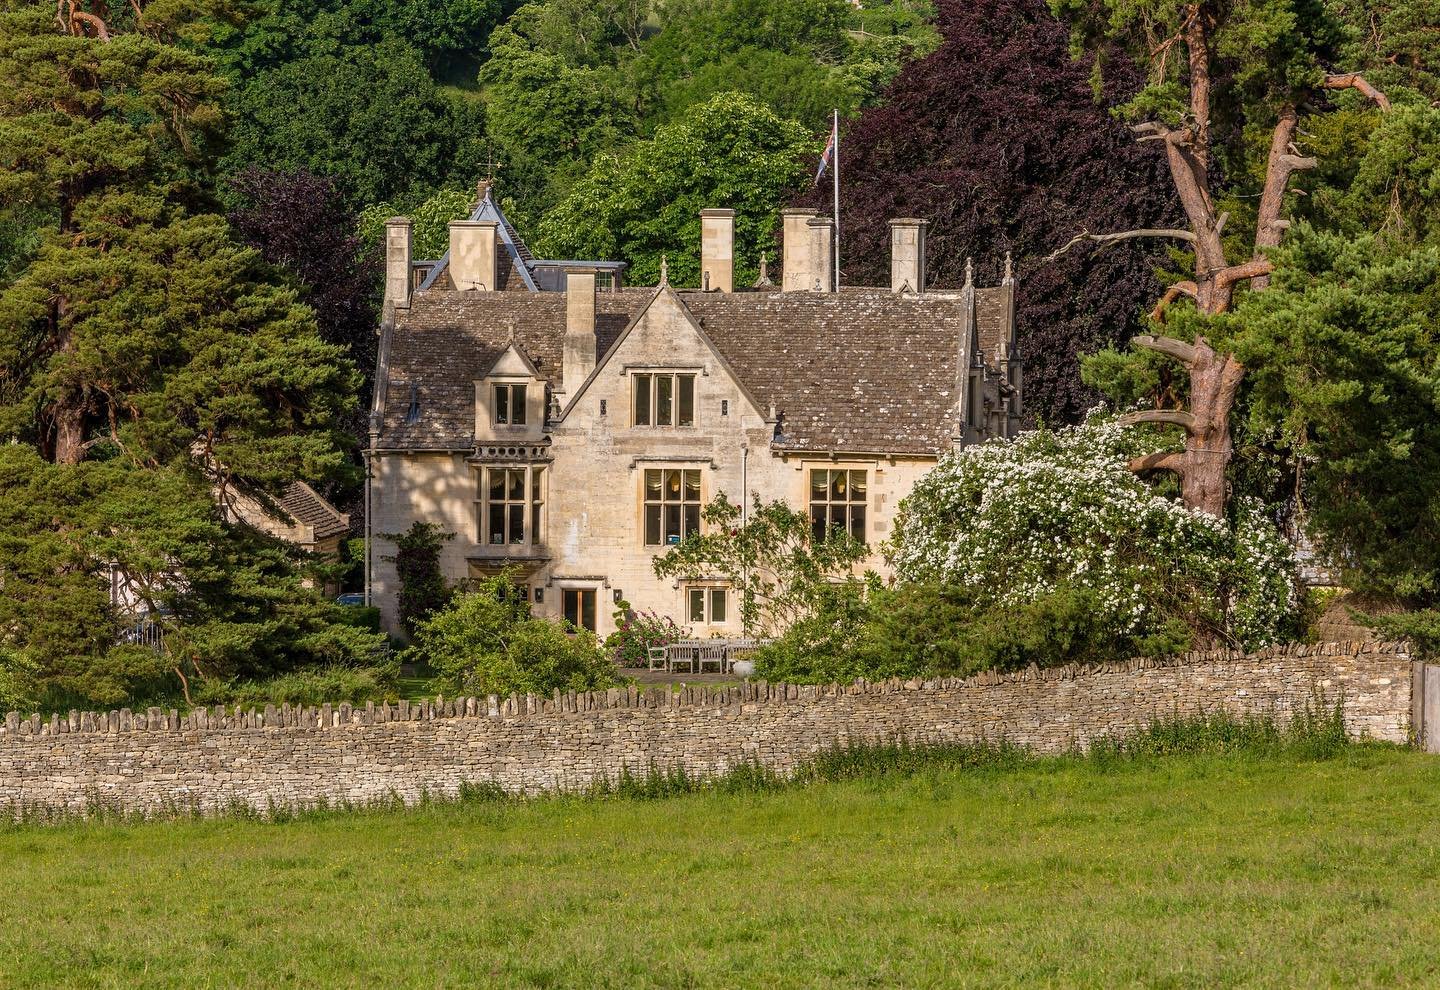 Francis York TCotswolds House Built on the  Site of an Ancient Roman Villa  Savills Bluebook Agency 5.jpg